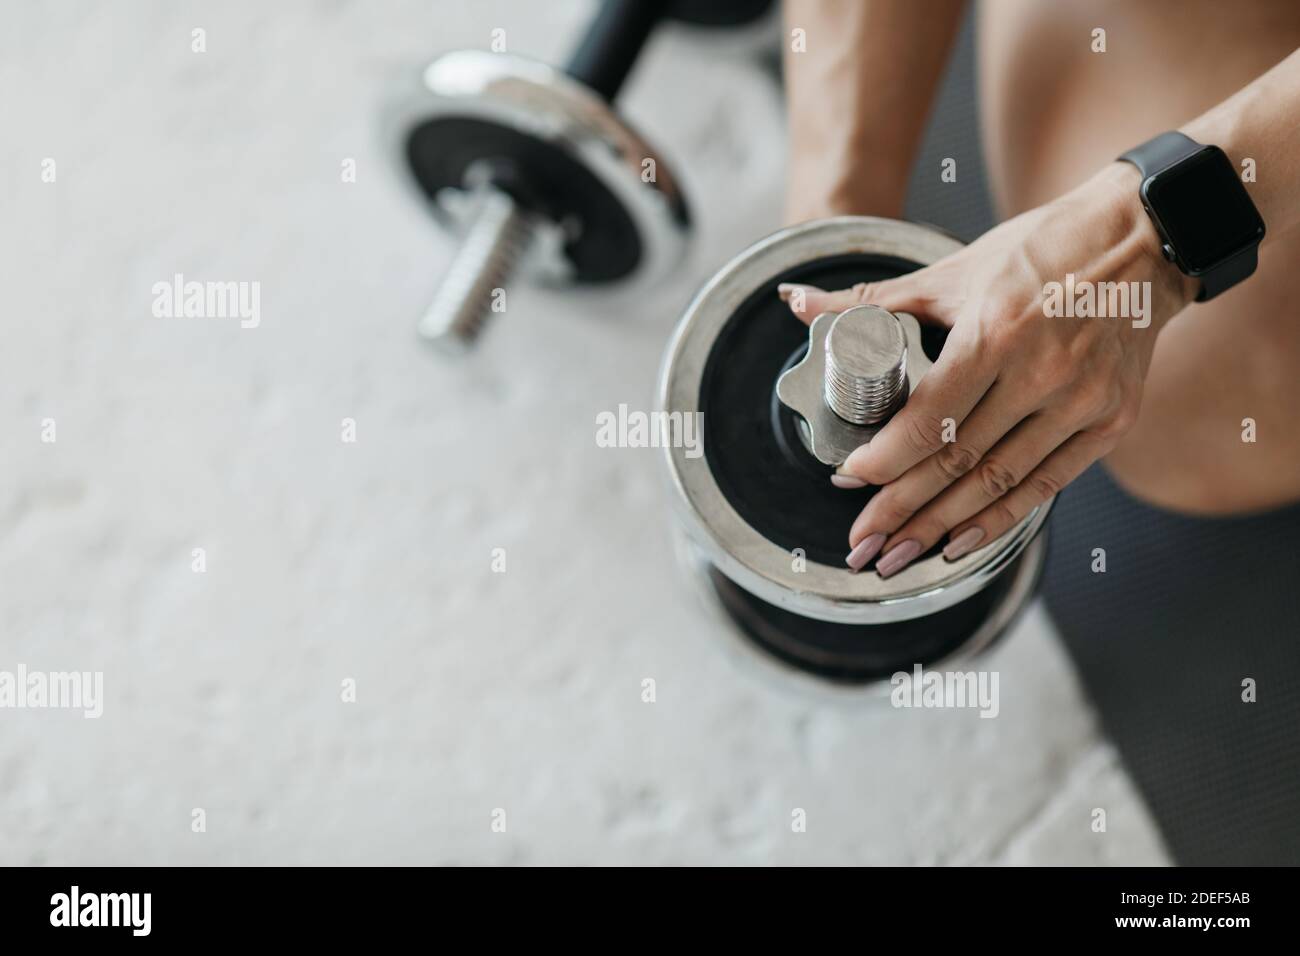 Modern technology and strength training. Middle aged woman tunes tools, changes weight on dumbbell Stock Photo